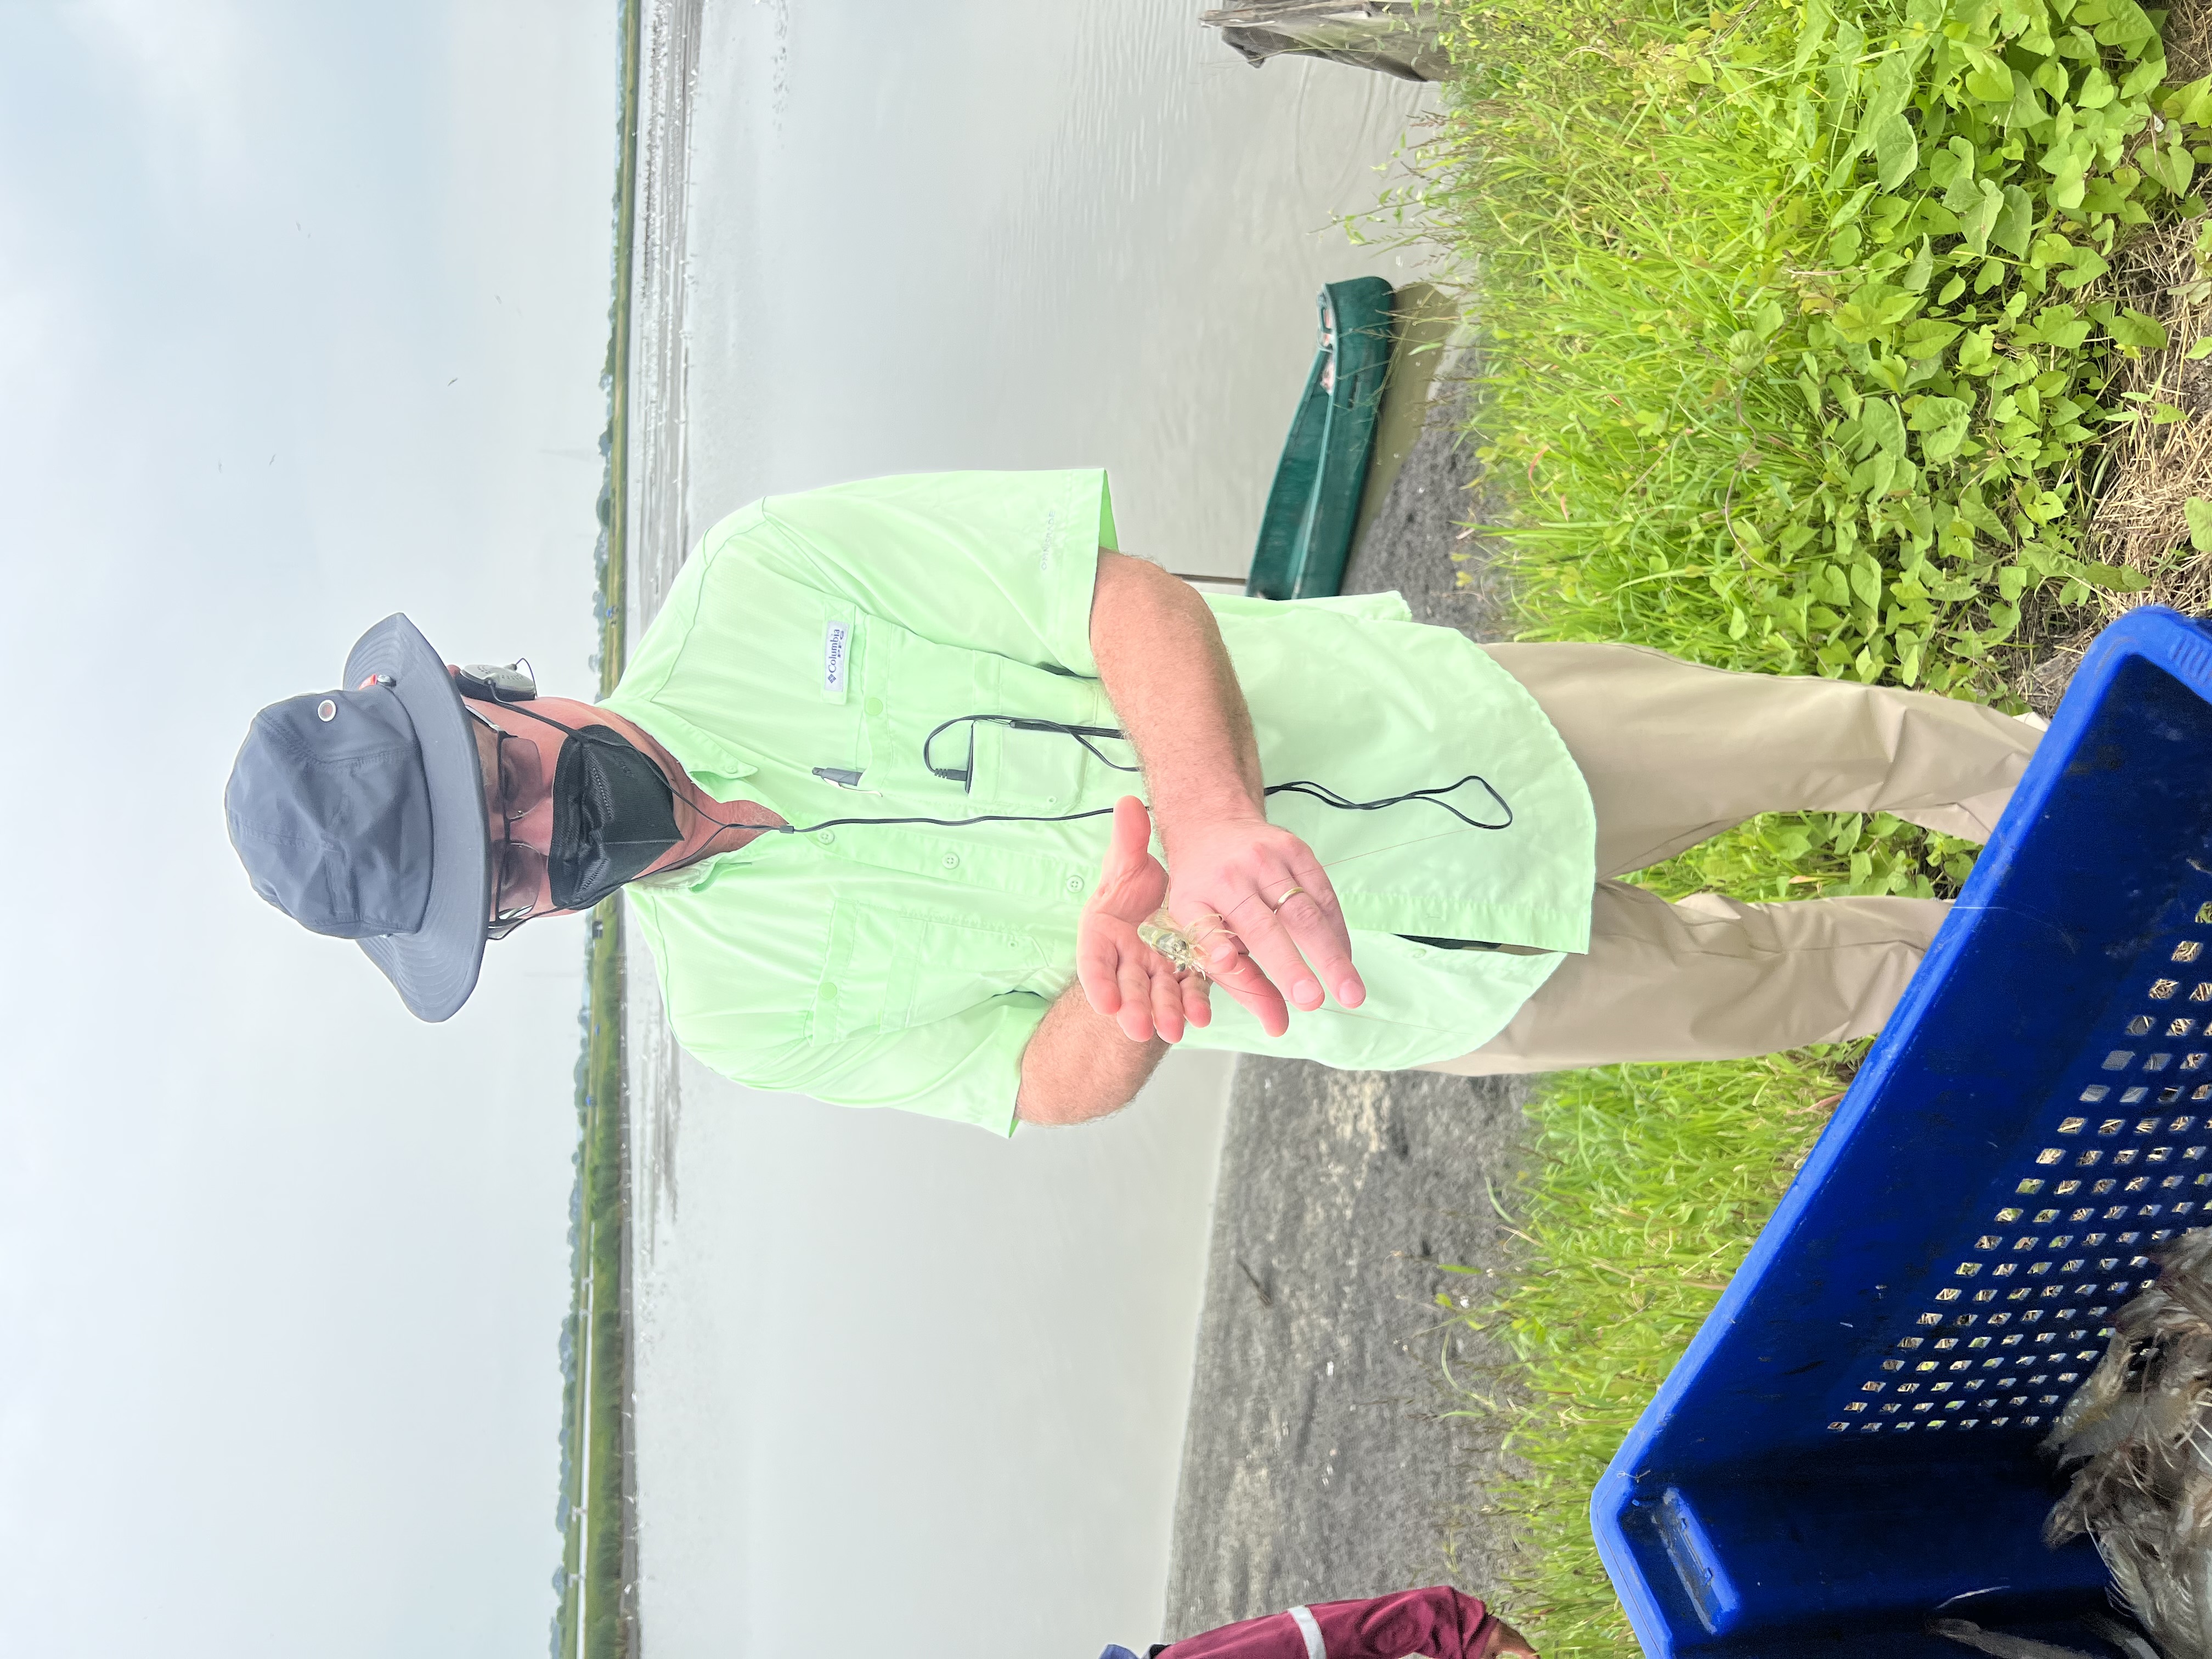 Michael Schwarz is seen holding a shrimp. A body of water with a small boat is in the background, and a basket full of shrimp is visible in the foreground.